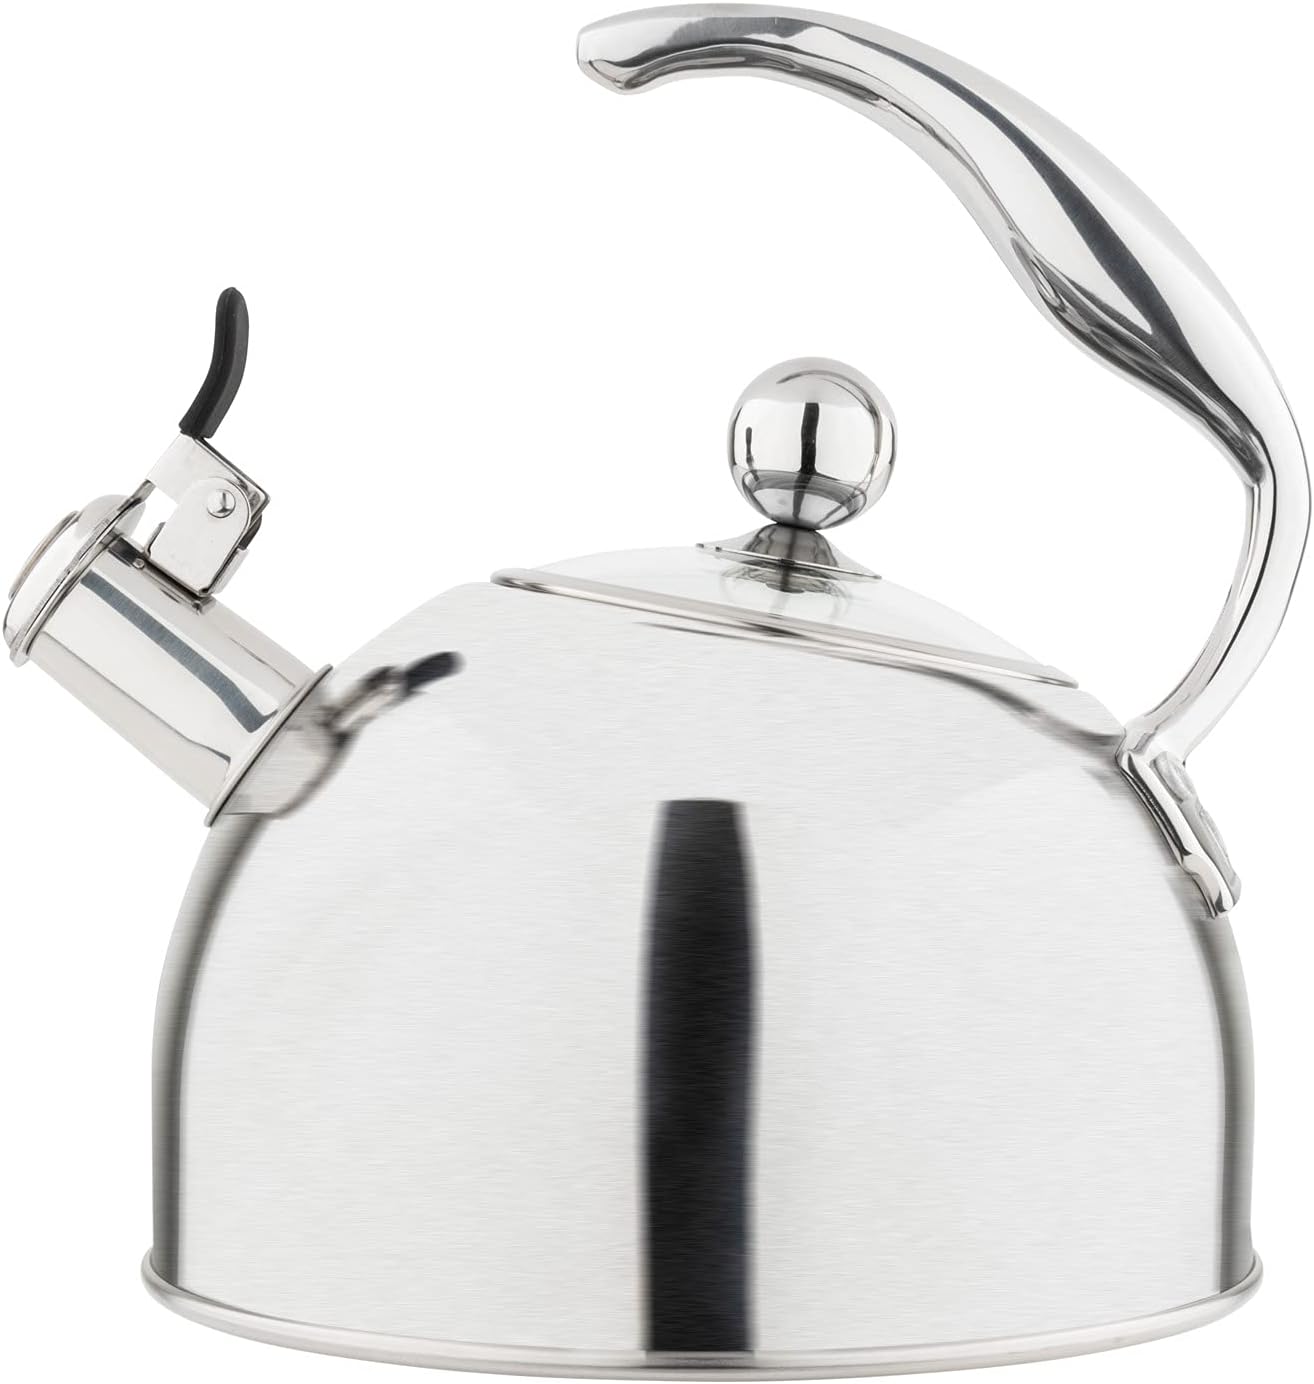 Fantastic stainless kettle. Works with my induction stove top. Easy to clean, easy to use and very well made.